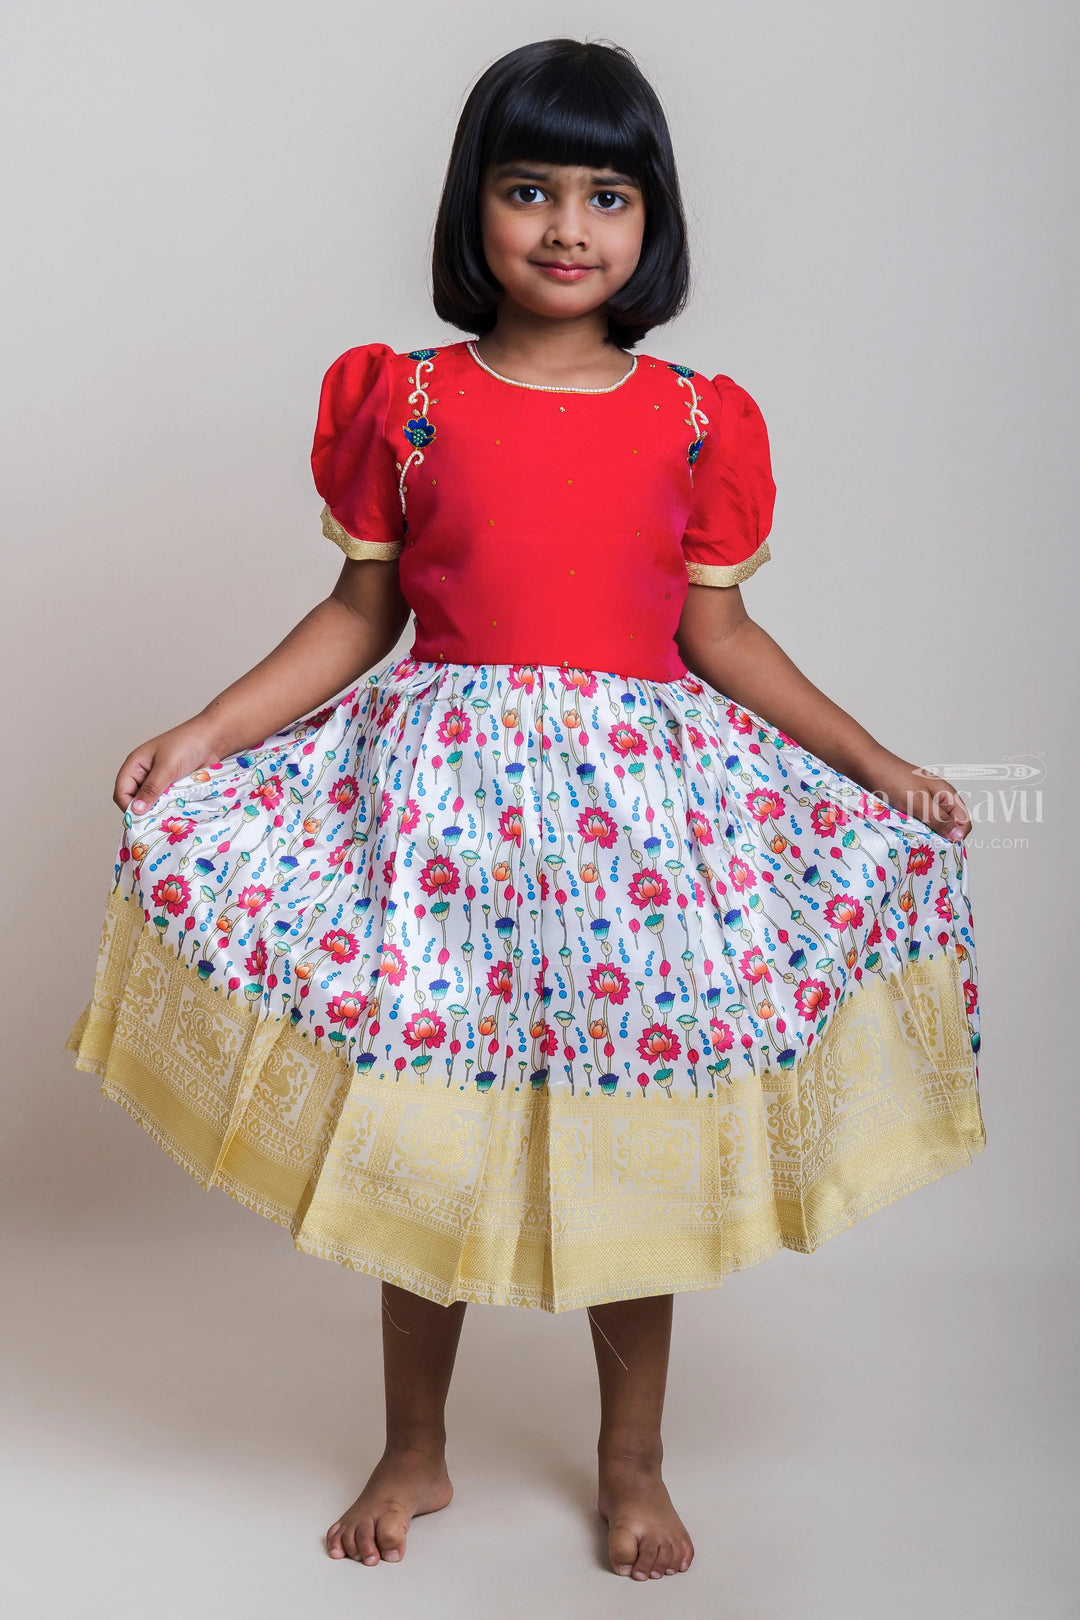 The Nesavu Silk Party Frock Pink Embroidered Yoke And Floral Printed Flare Semi-Silk Frocks For Girls Nesavu 16 (1Y) / multicolor SF480-16 Sakranti Silk Frocks For Girls| Festive Wear Collection| The Nesavu